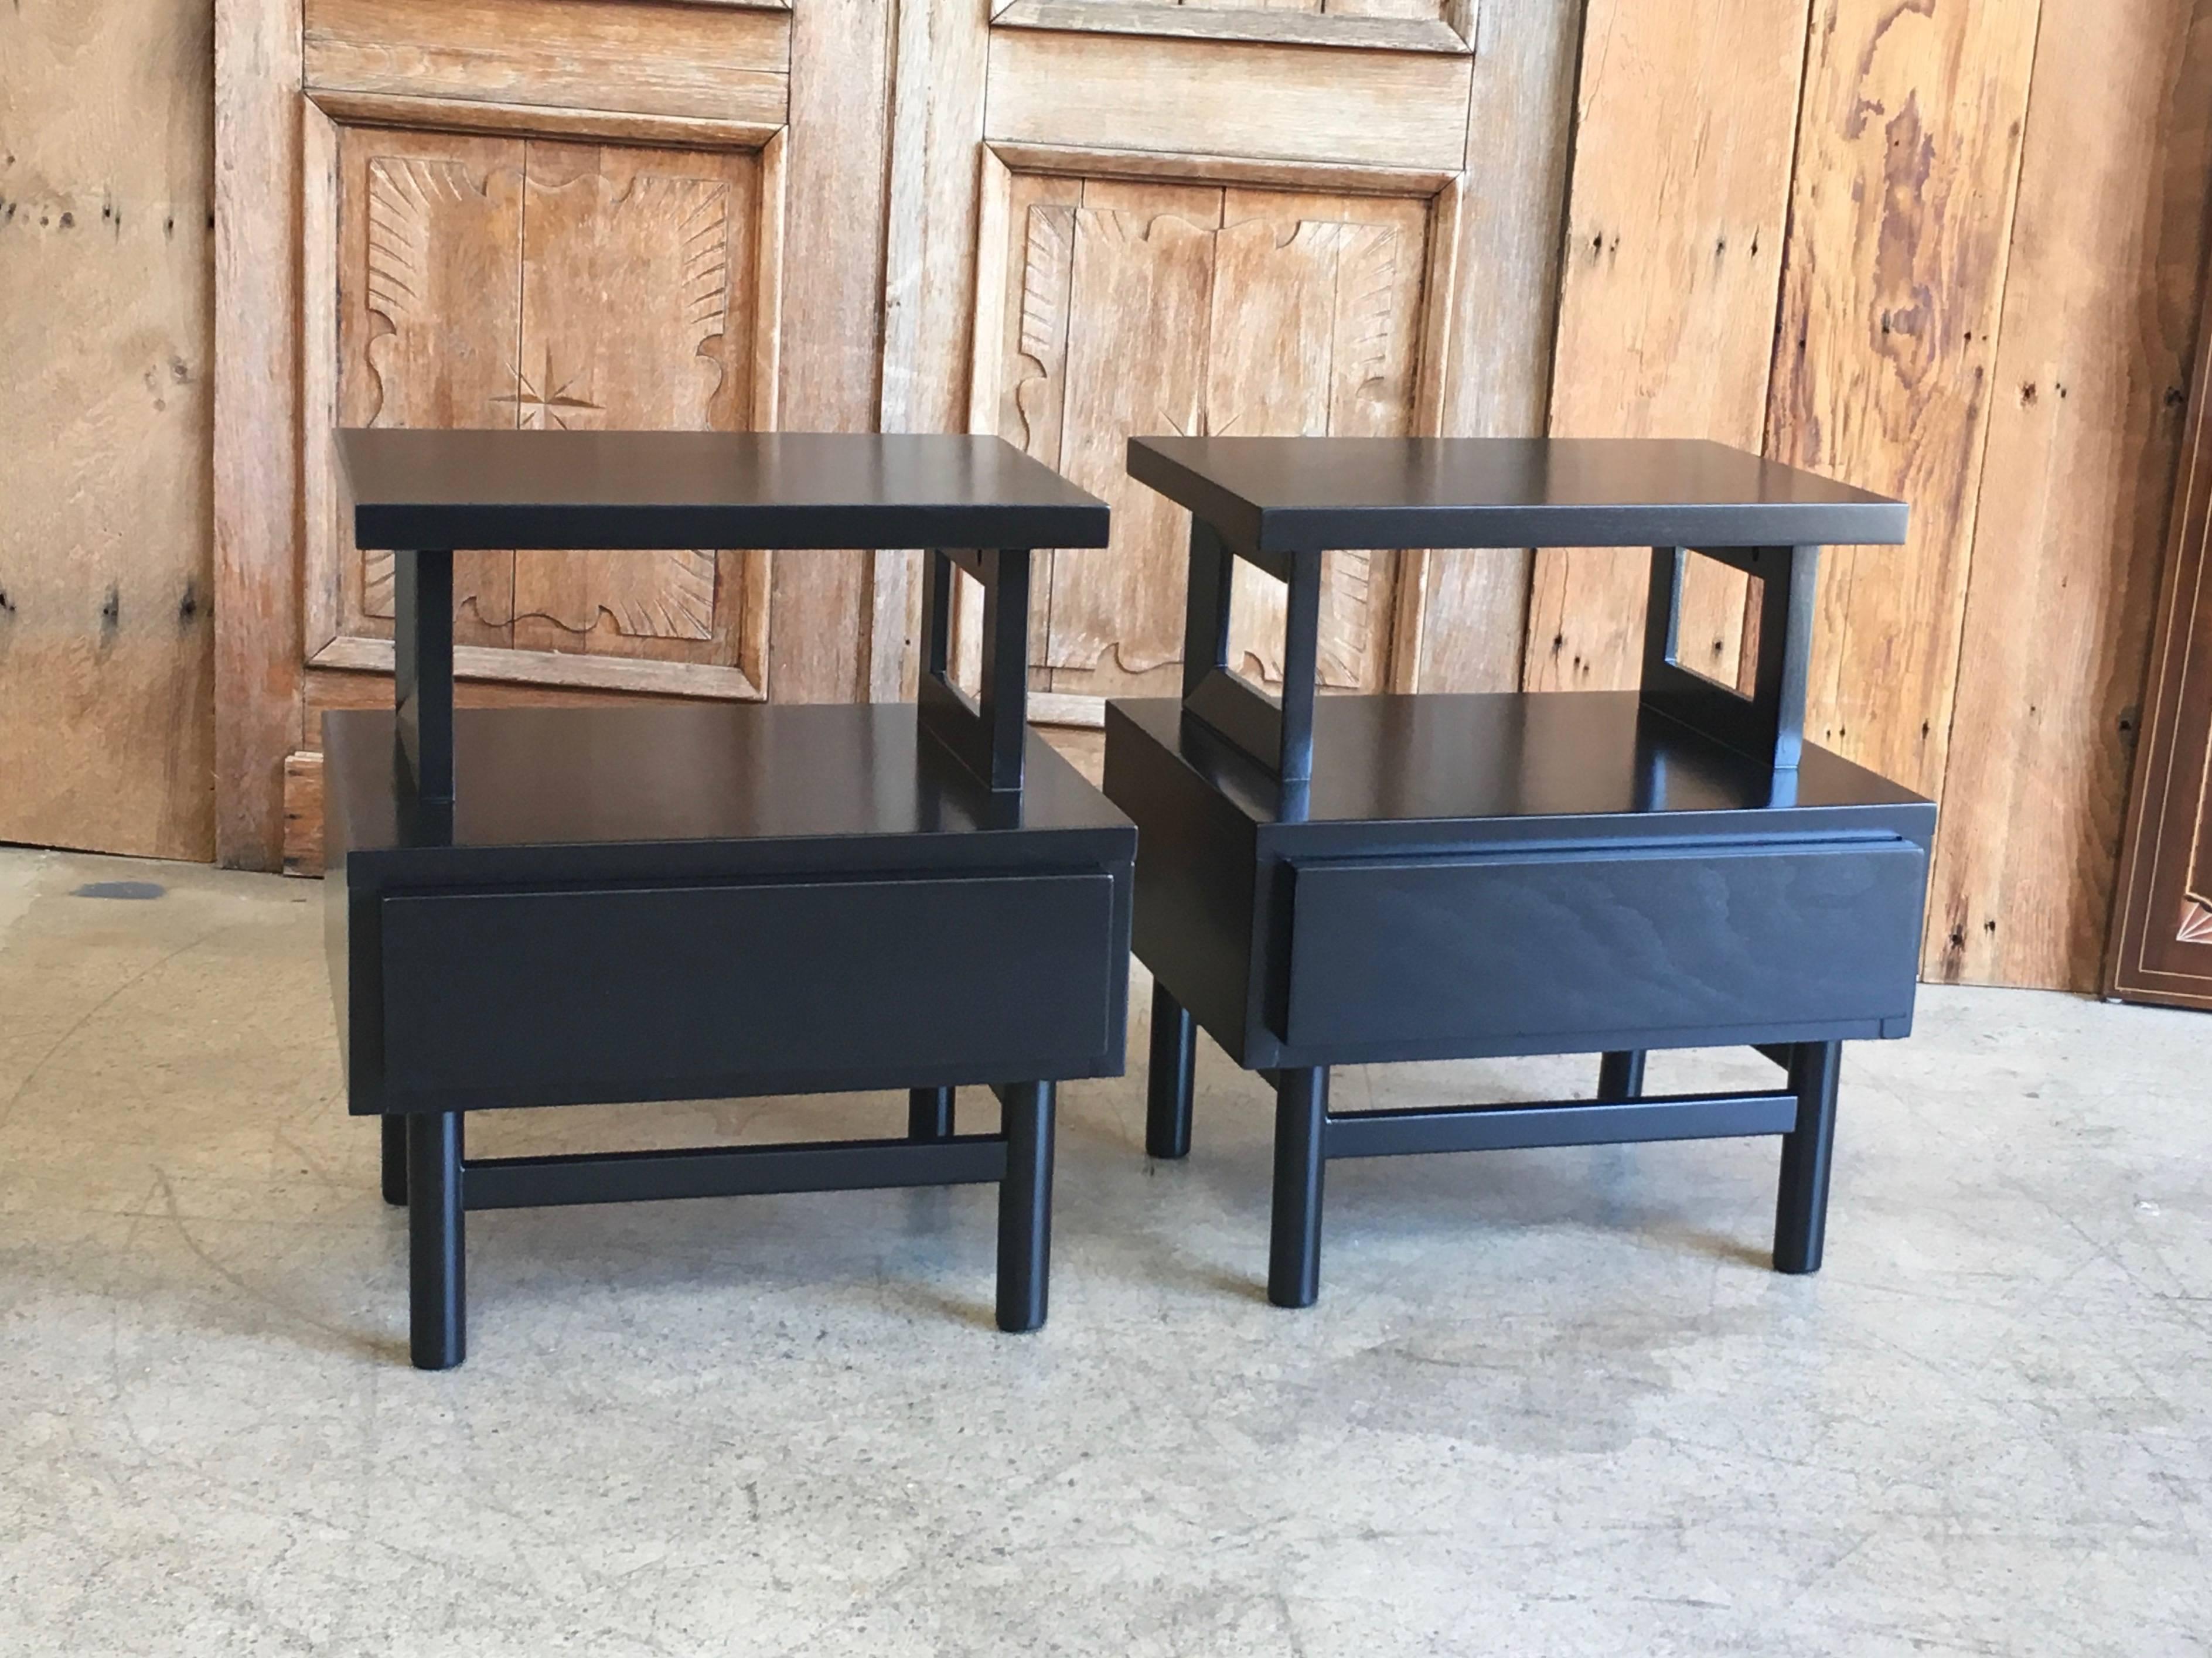 Two-tiered nightstands with a single drawer in a ebony stain with a satin finish.